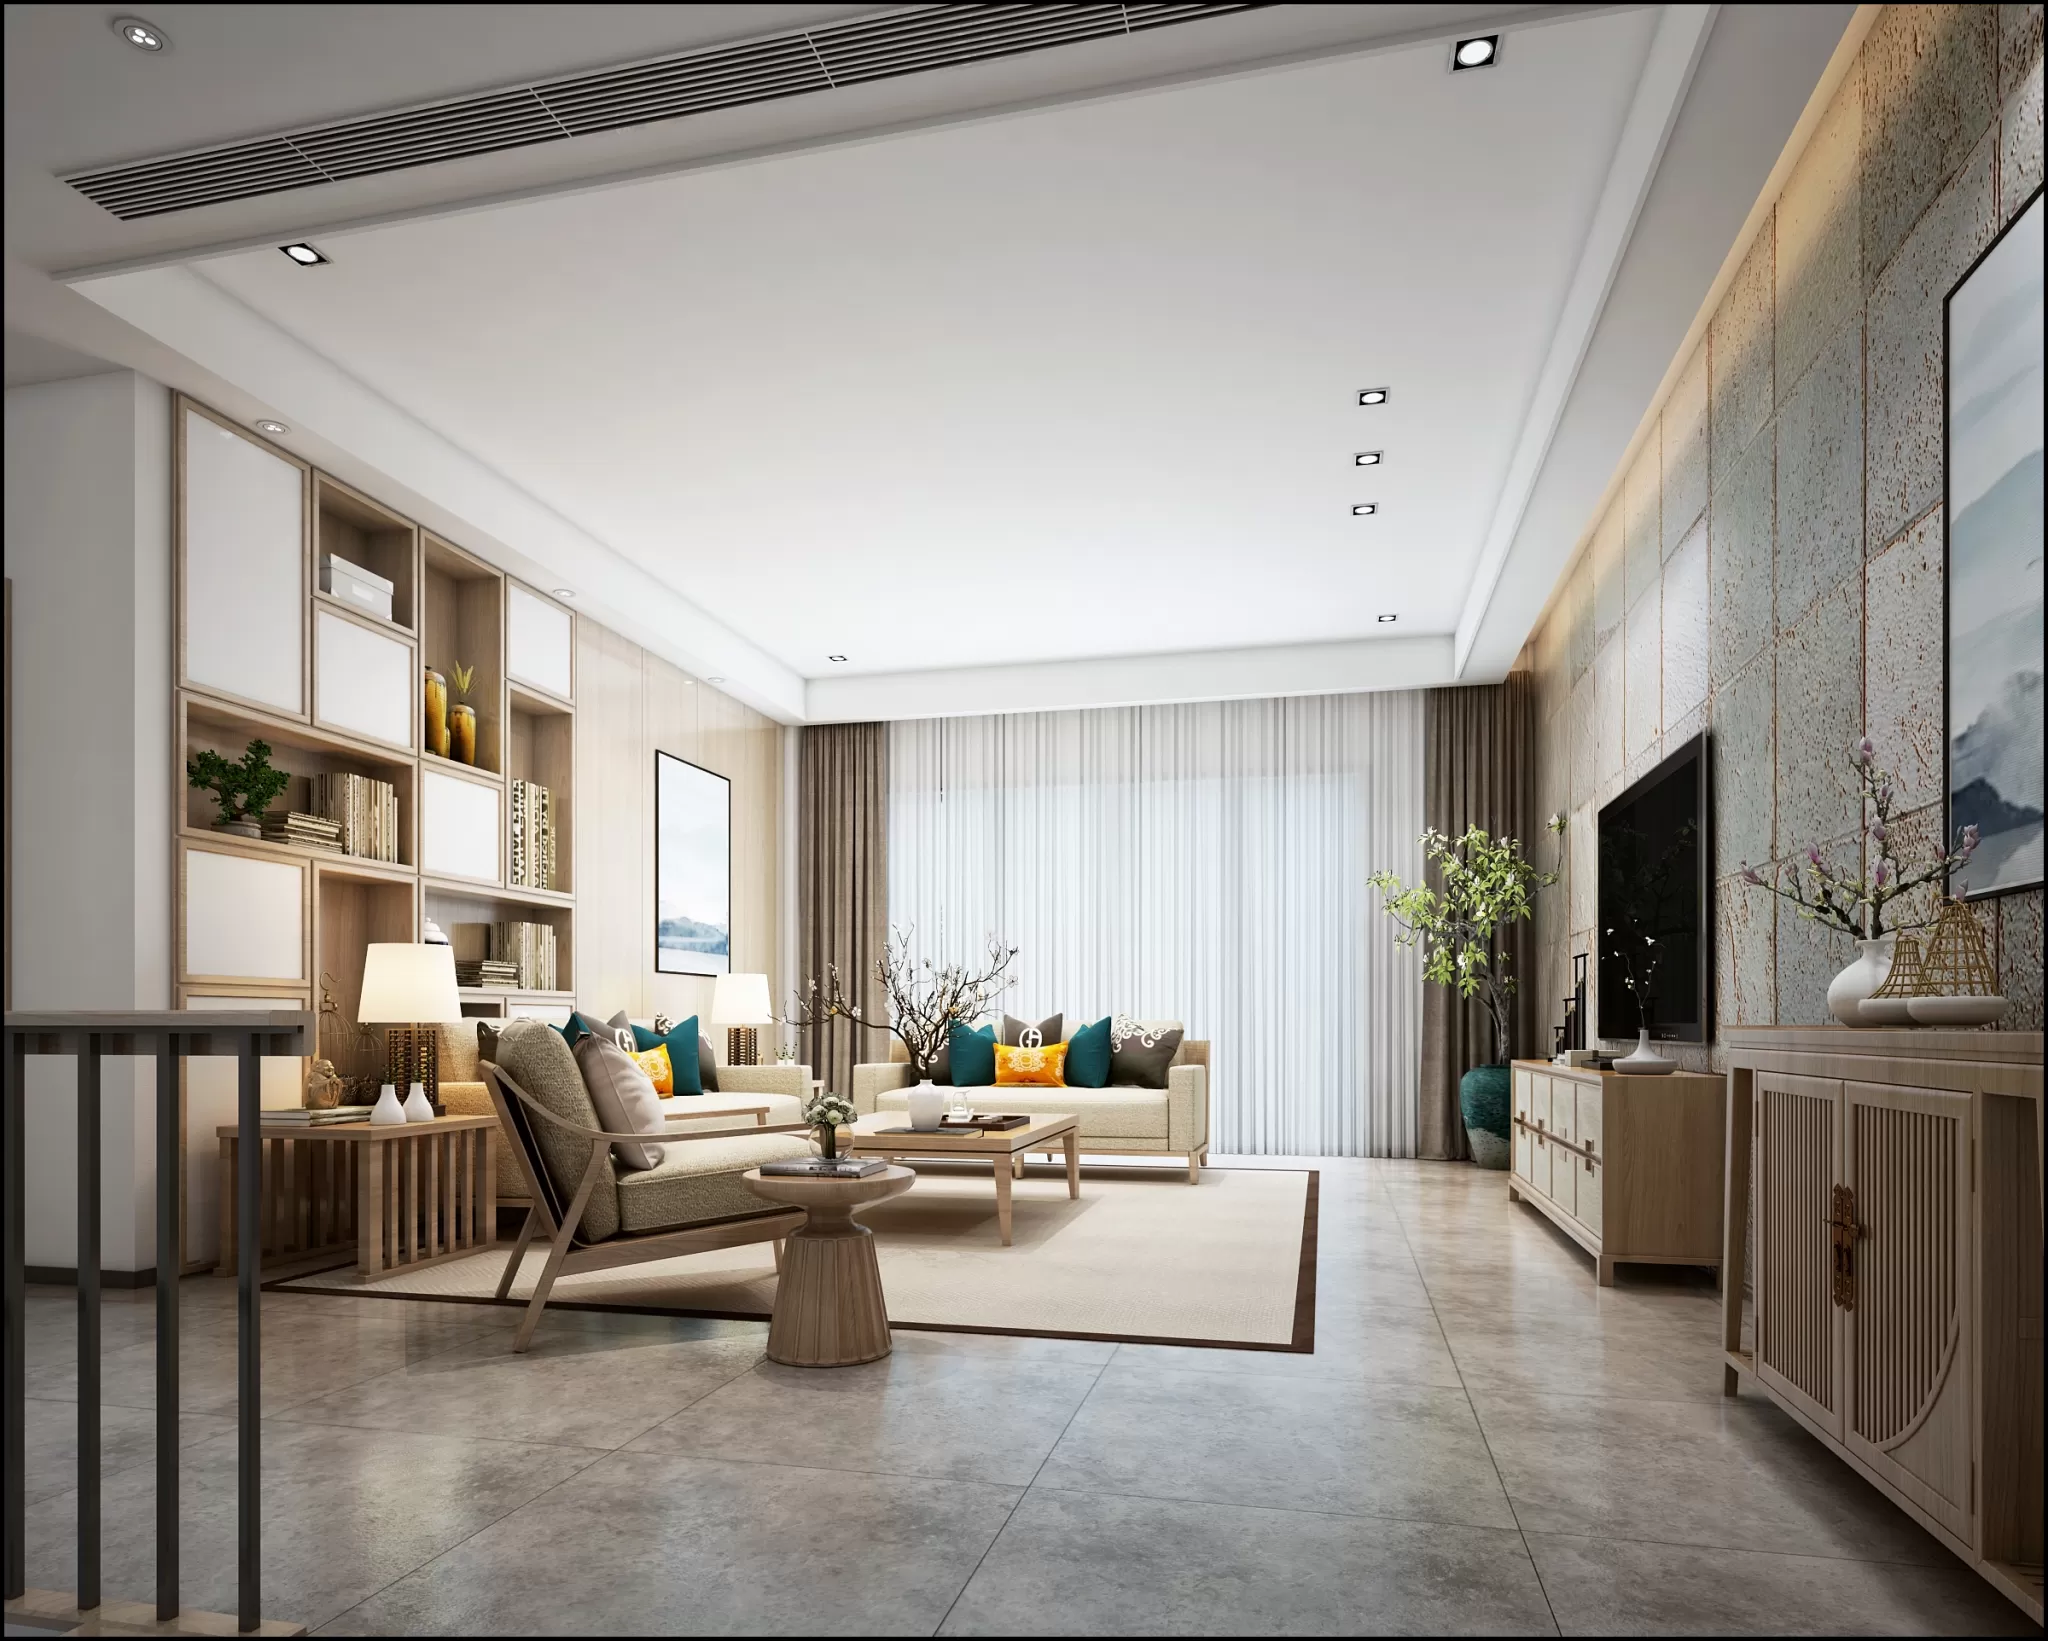 DESMOD INTERIOR 2021 (VRAY) – 4. LIVING ROOM – CHINESE – 026